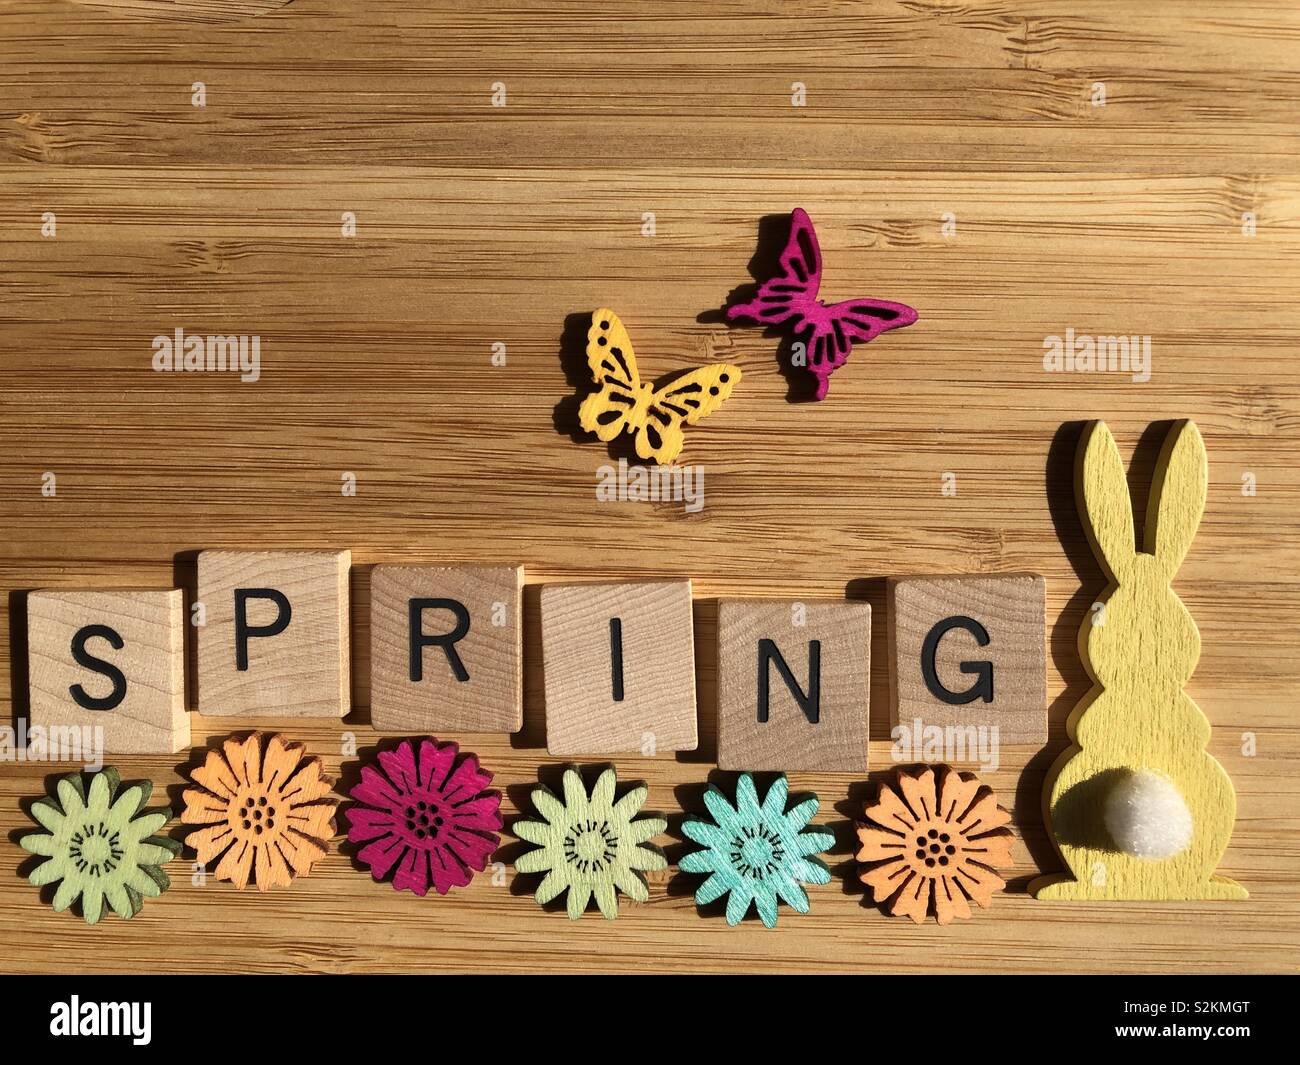 Spring, in wooden letters on wood background with flowers, butterflies and a rabbit Stock Photo